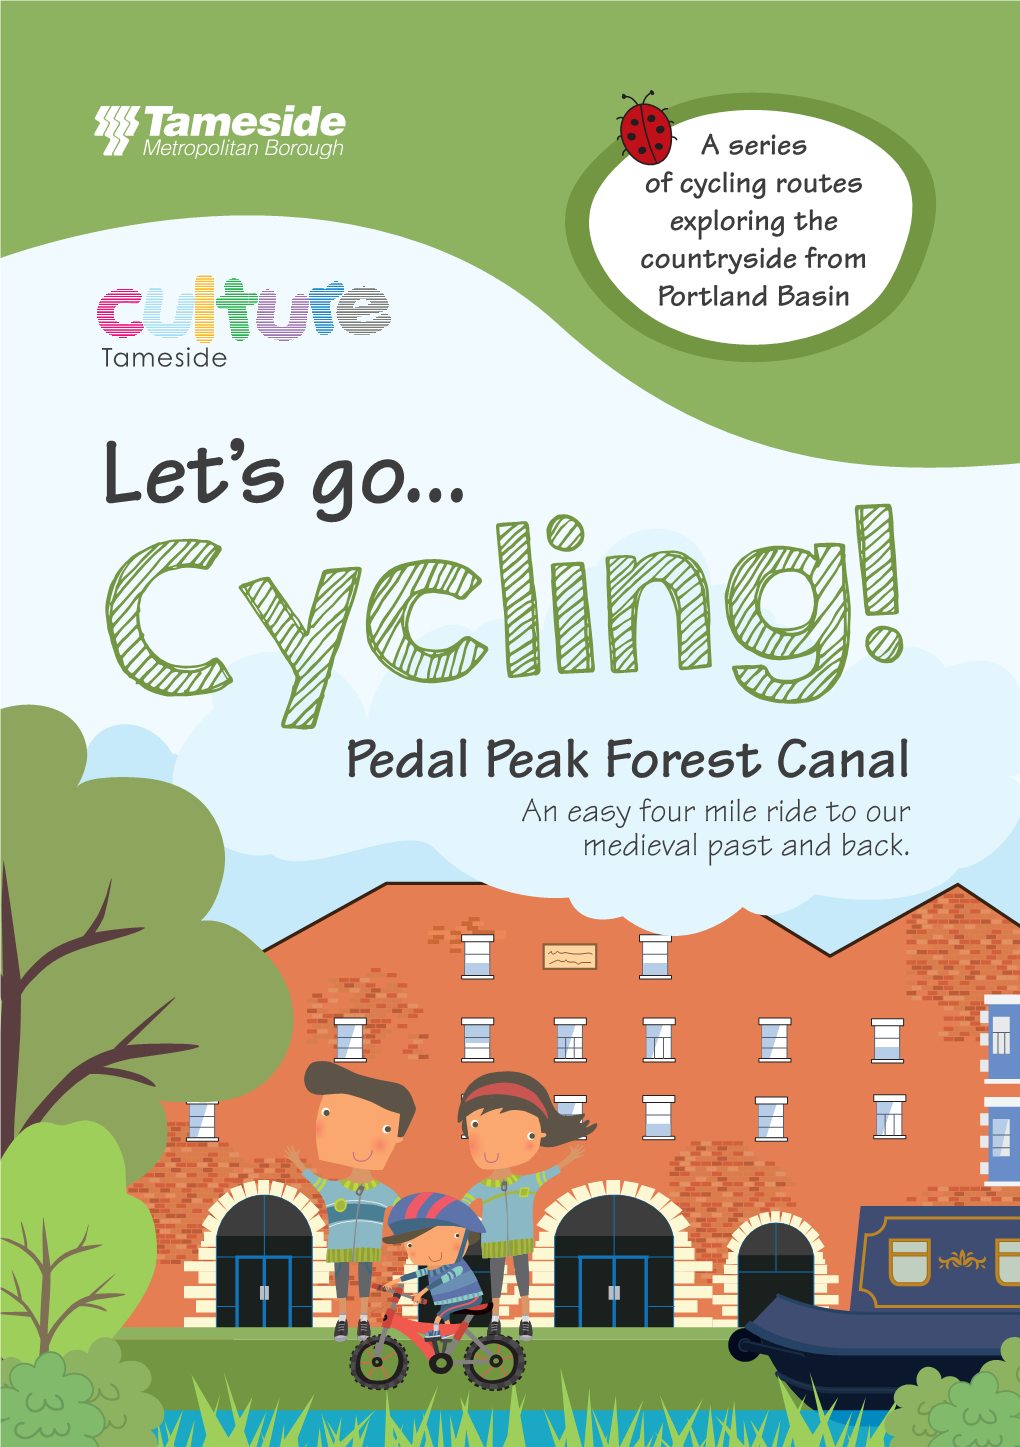 Pedal Peak Forest Canal an Easy Four Mile Ride to Our Medieval Past and Back